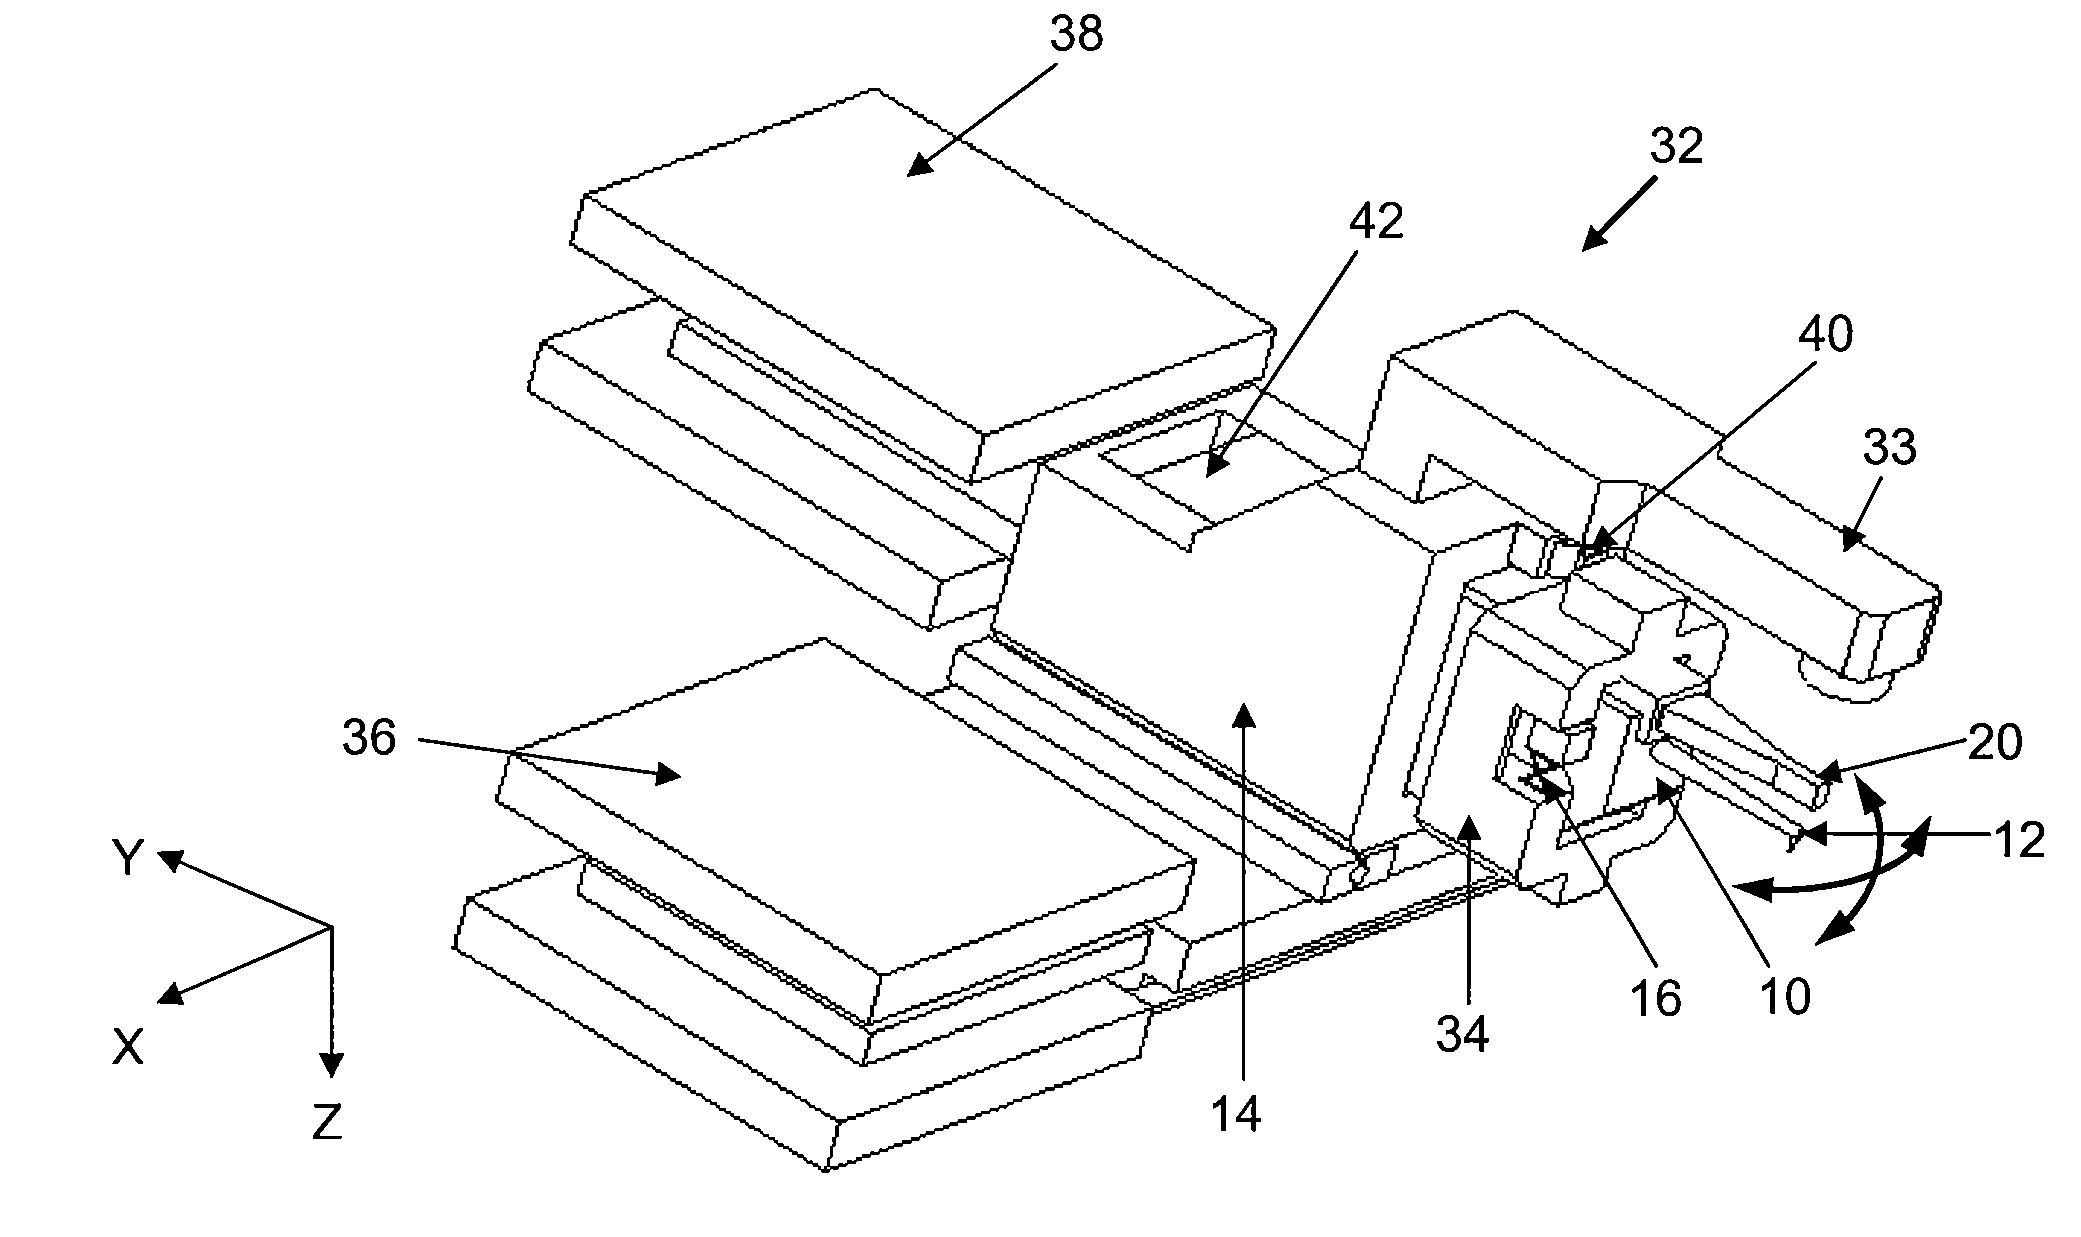 Wire bonding apparatus comprising rotary positioning stage